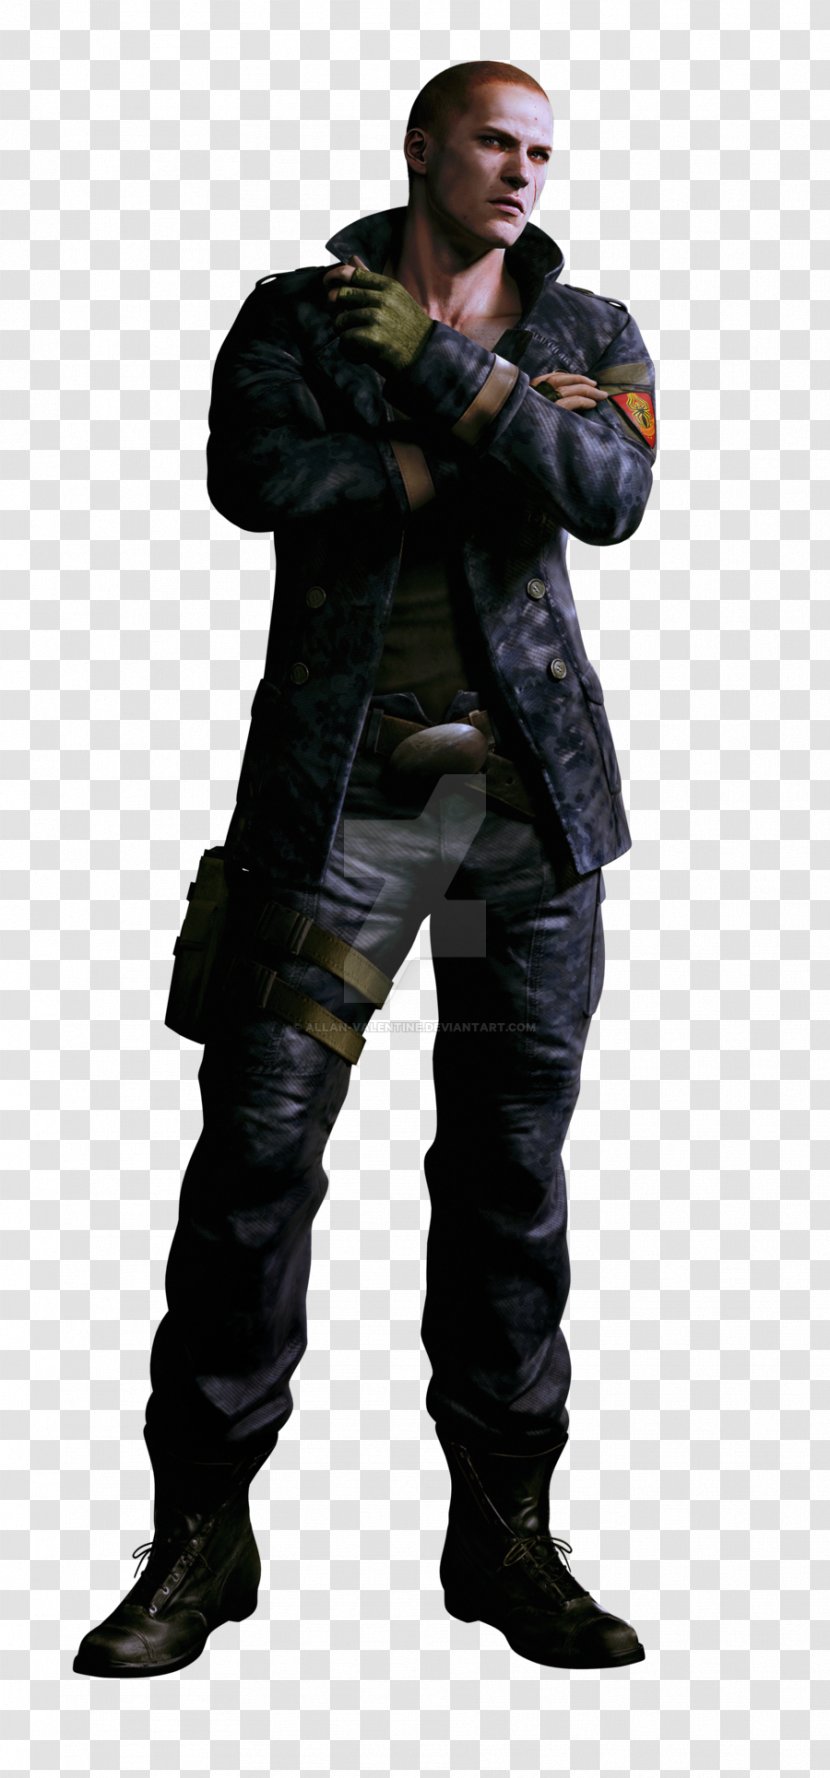 Resident Evil 6 7: Biohazard Chris Redfield Ada Wong Leon S. Kennedy - Leather Jacket Transparent PNG